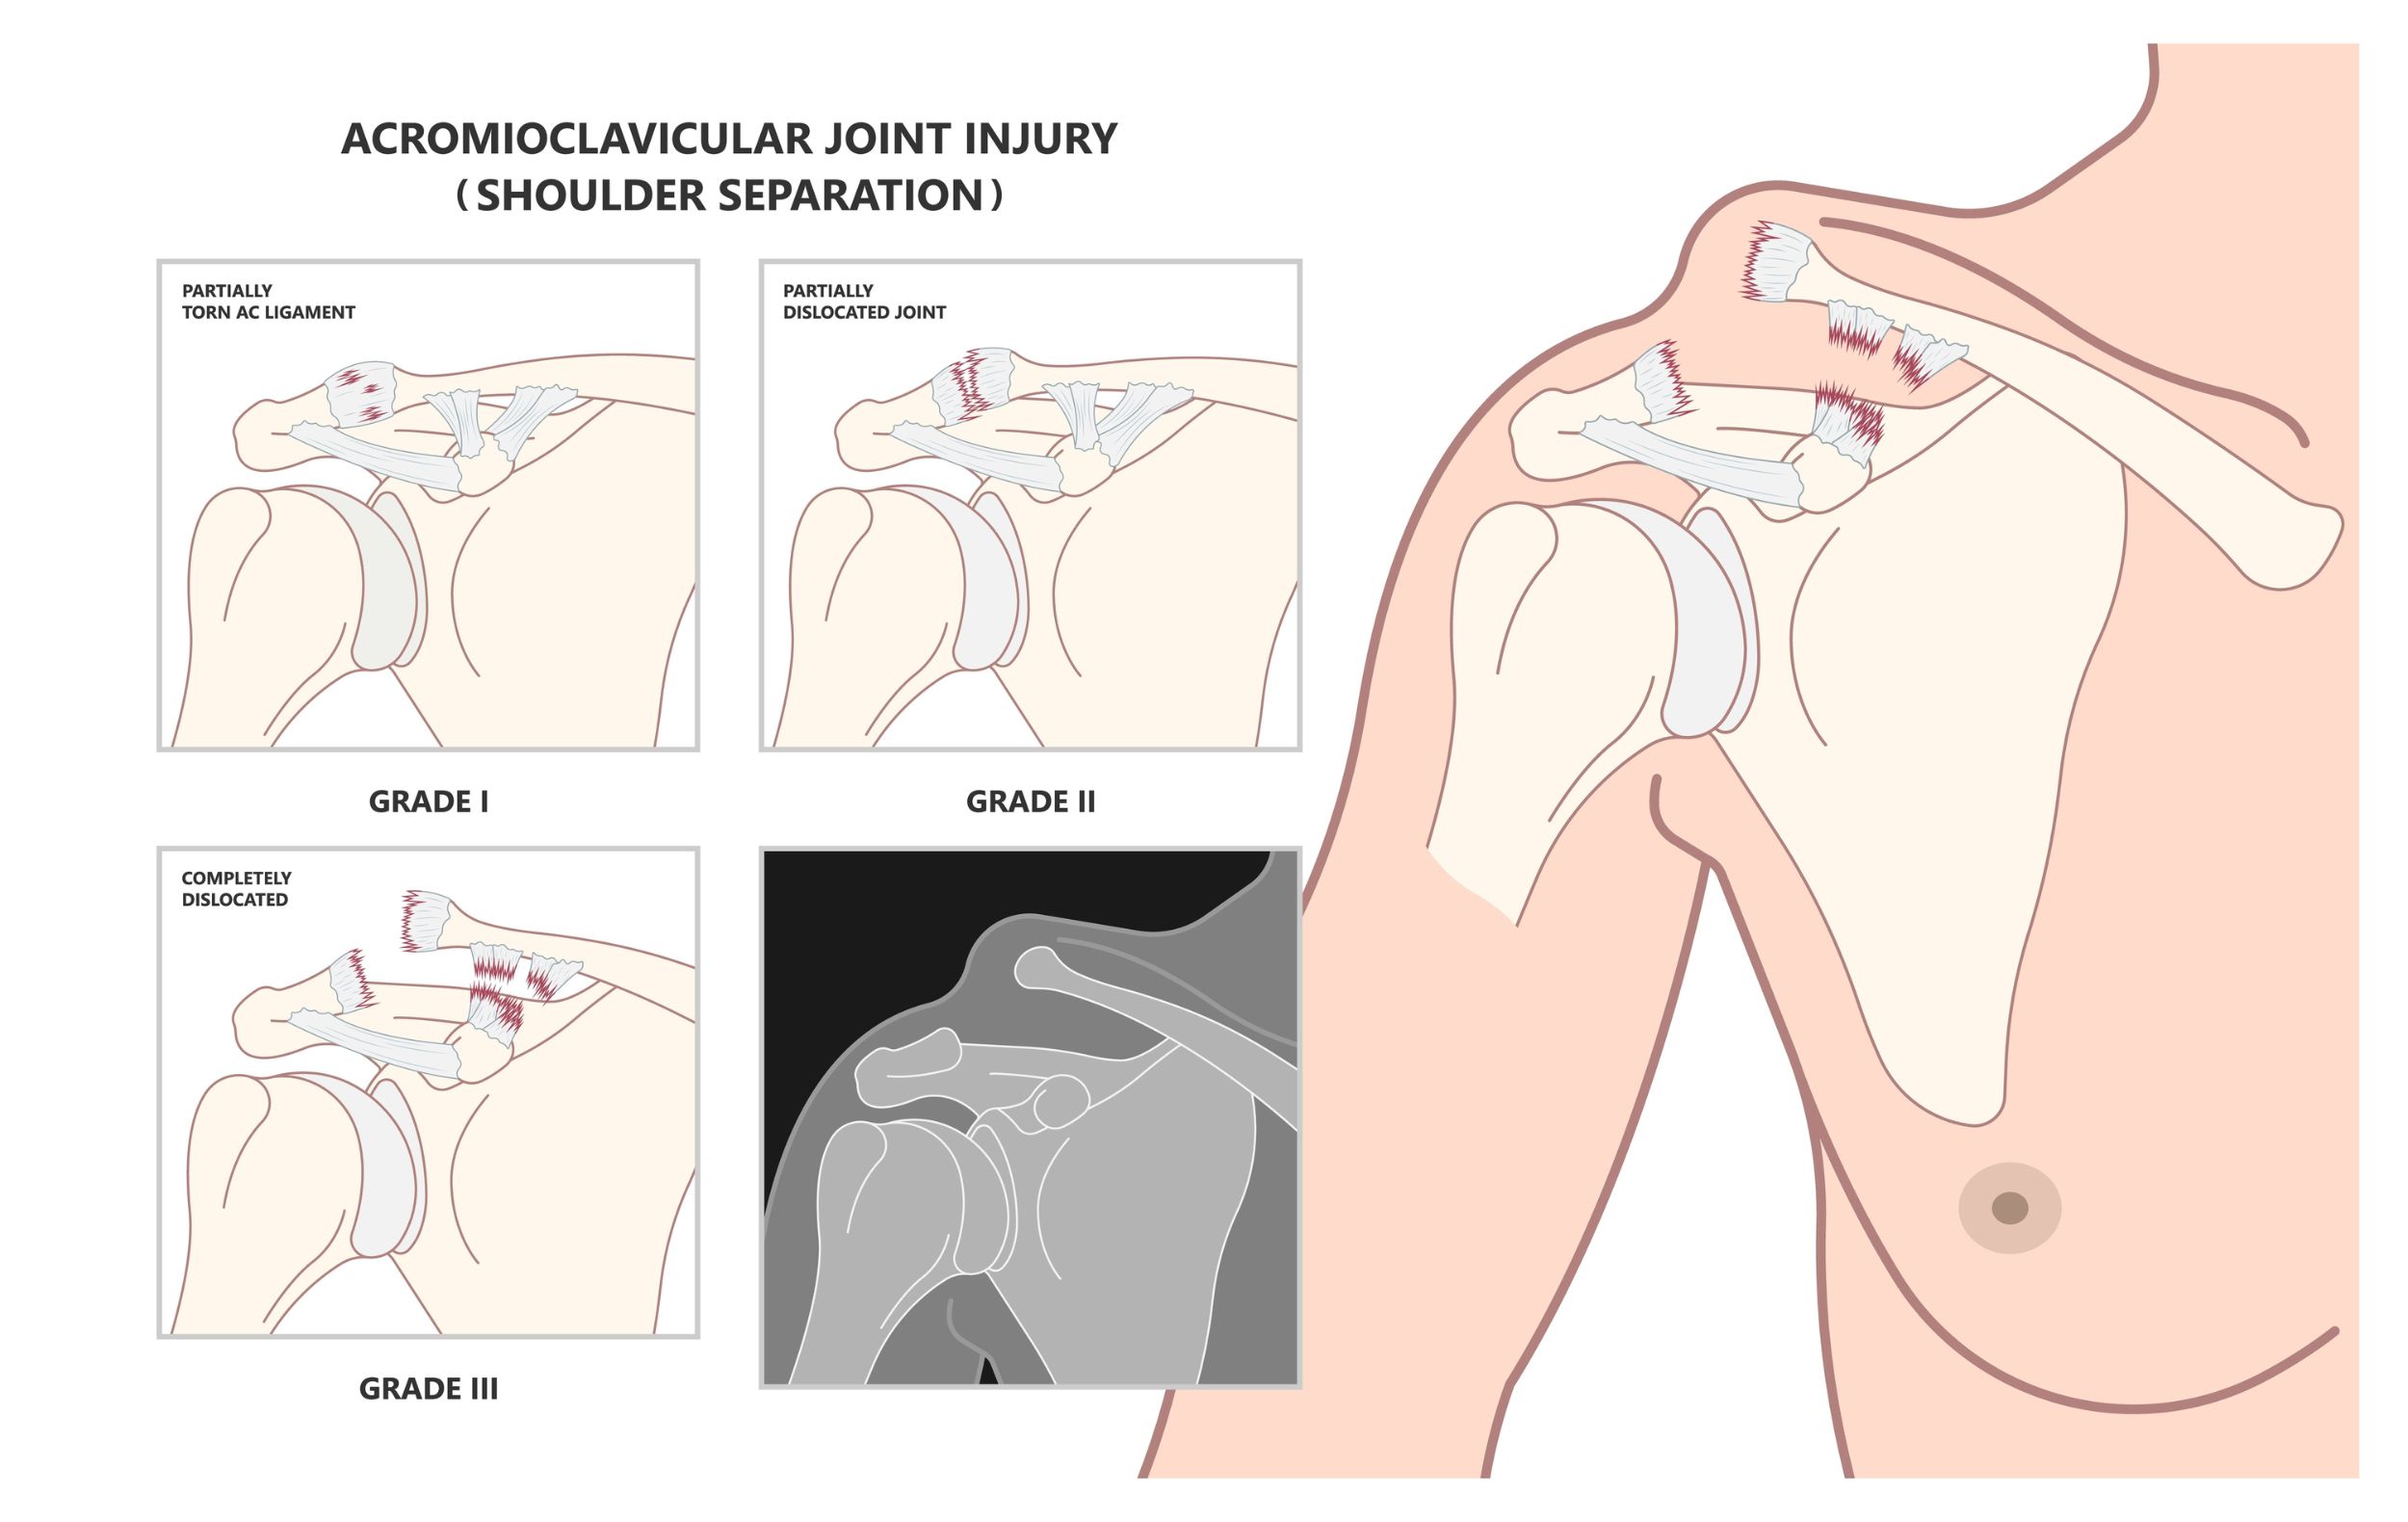 Acromioclavicular joint injury. AC joint separation treatment Propel Physiotherapy.